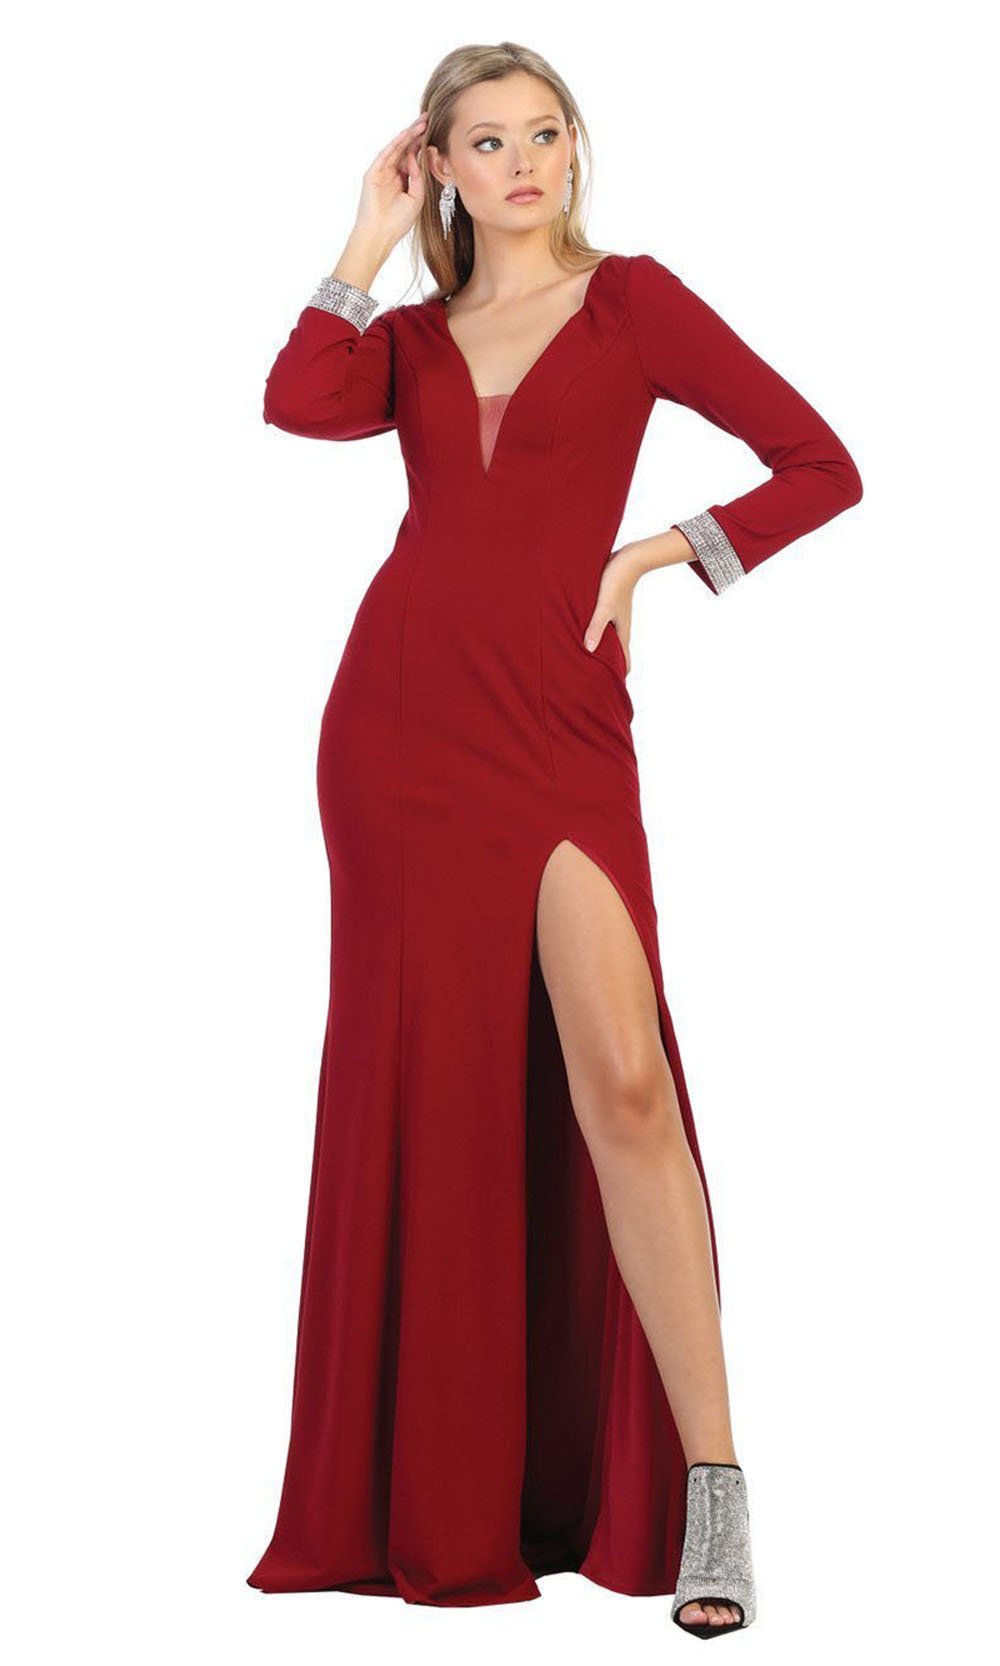 May Queen - Jeweled Cuff Long Sleeves Dress with Slit MQ1761 In Red